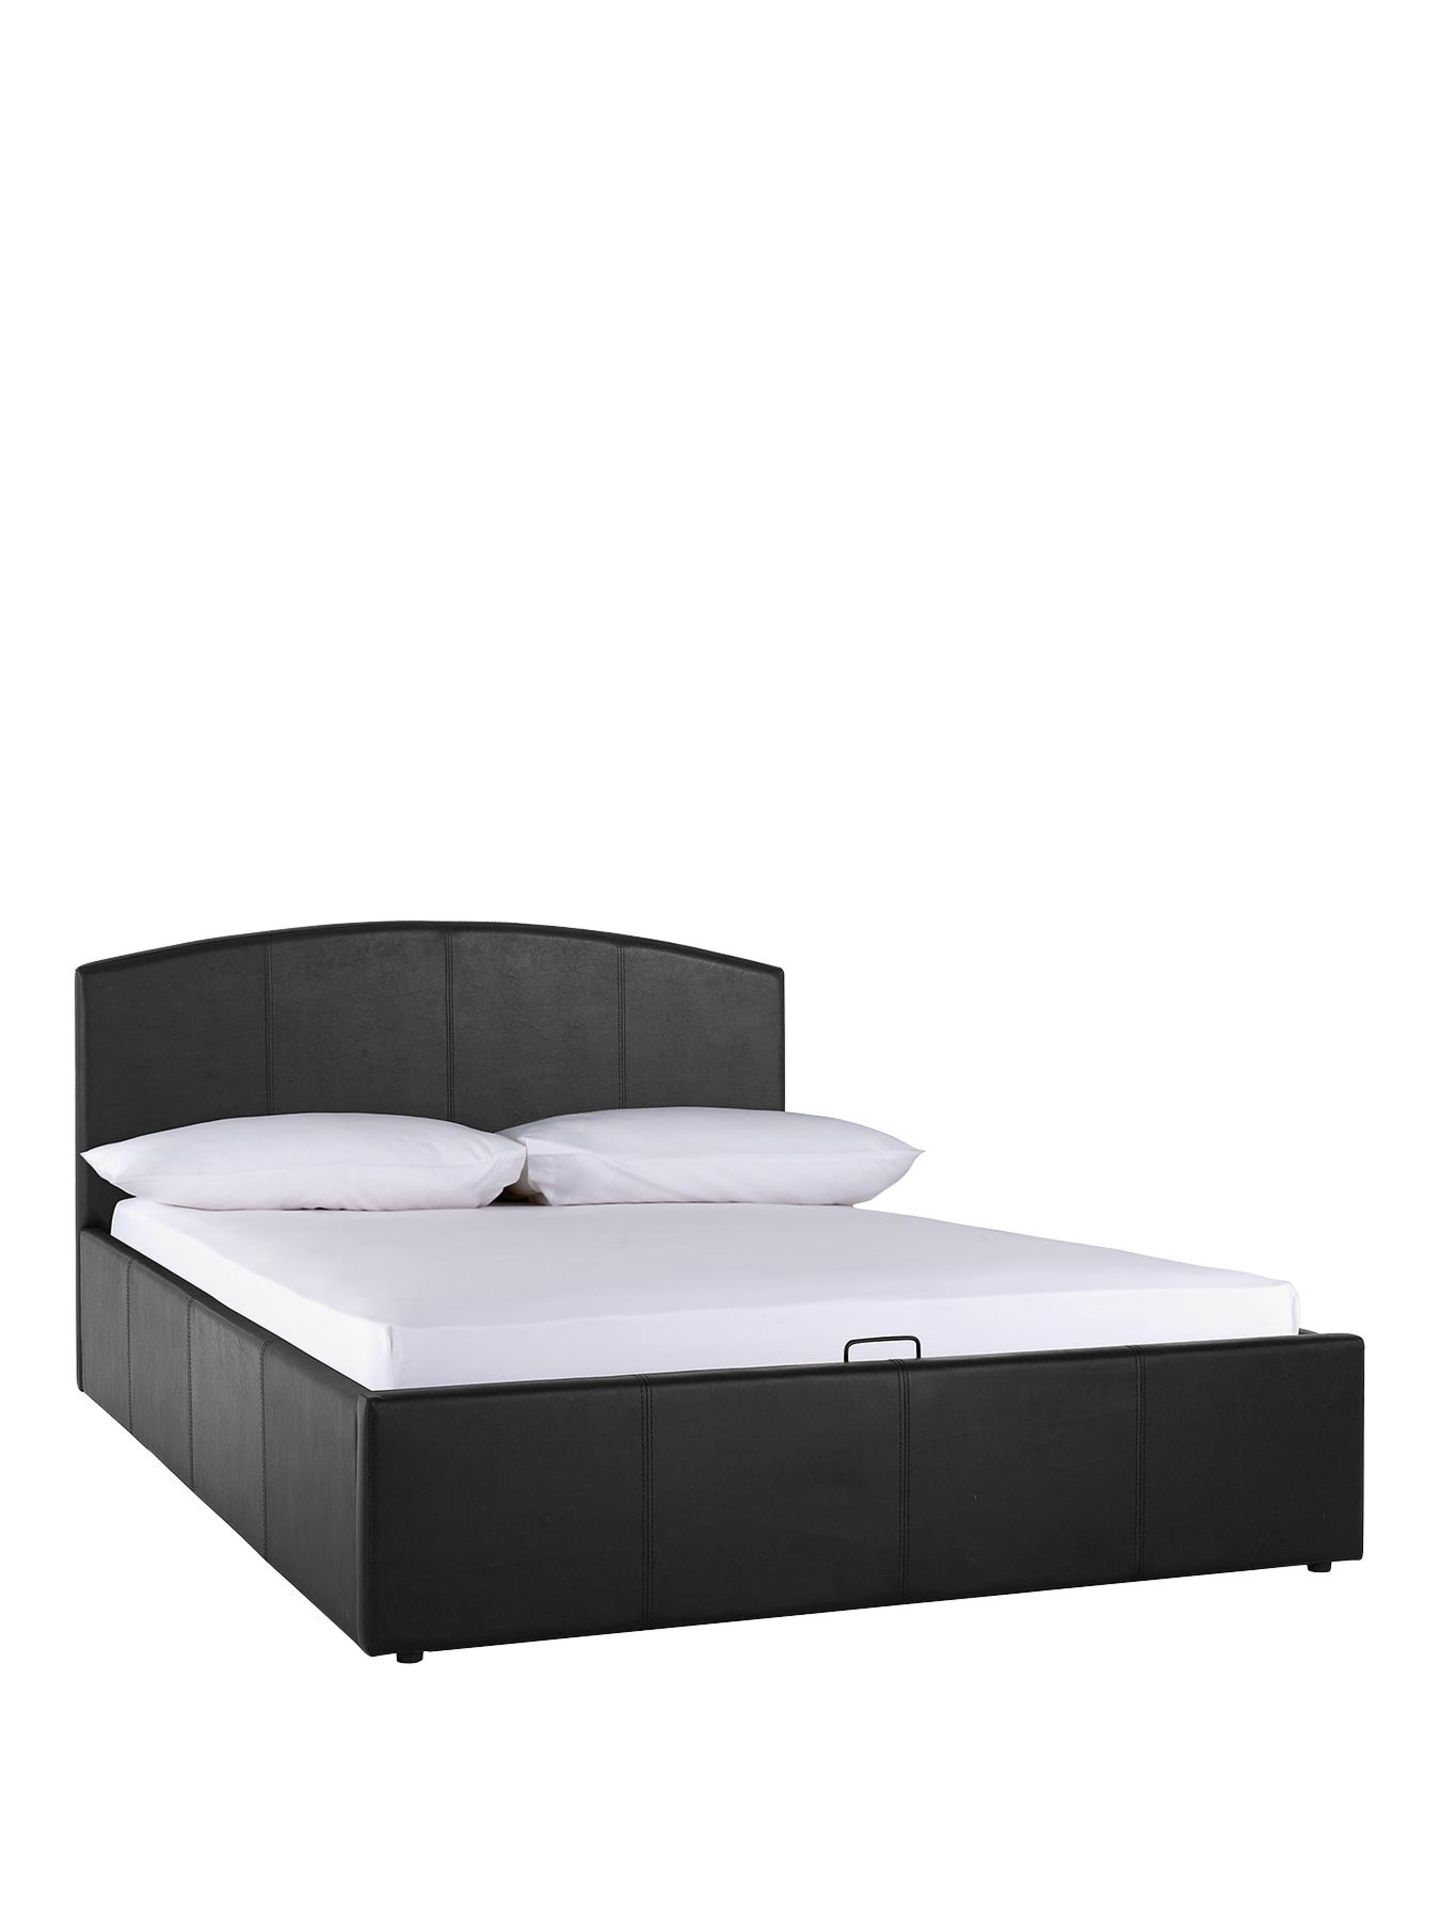 Boxed Item Marston King Lift-Up Bed [Black] 88X159X212Cm Rrp:£538.0